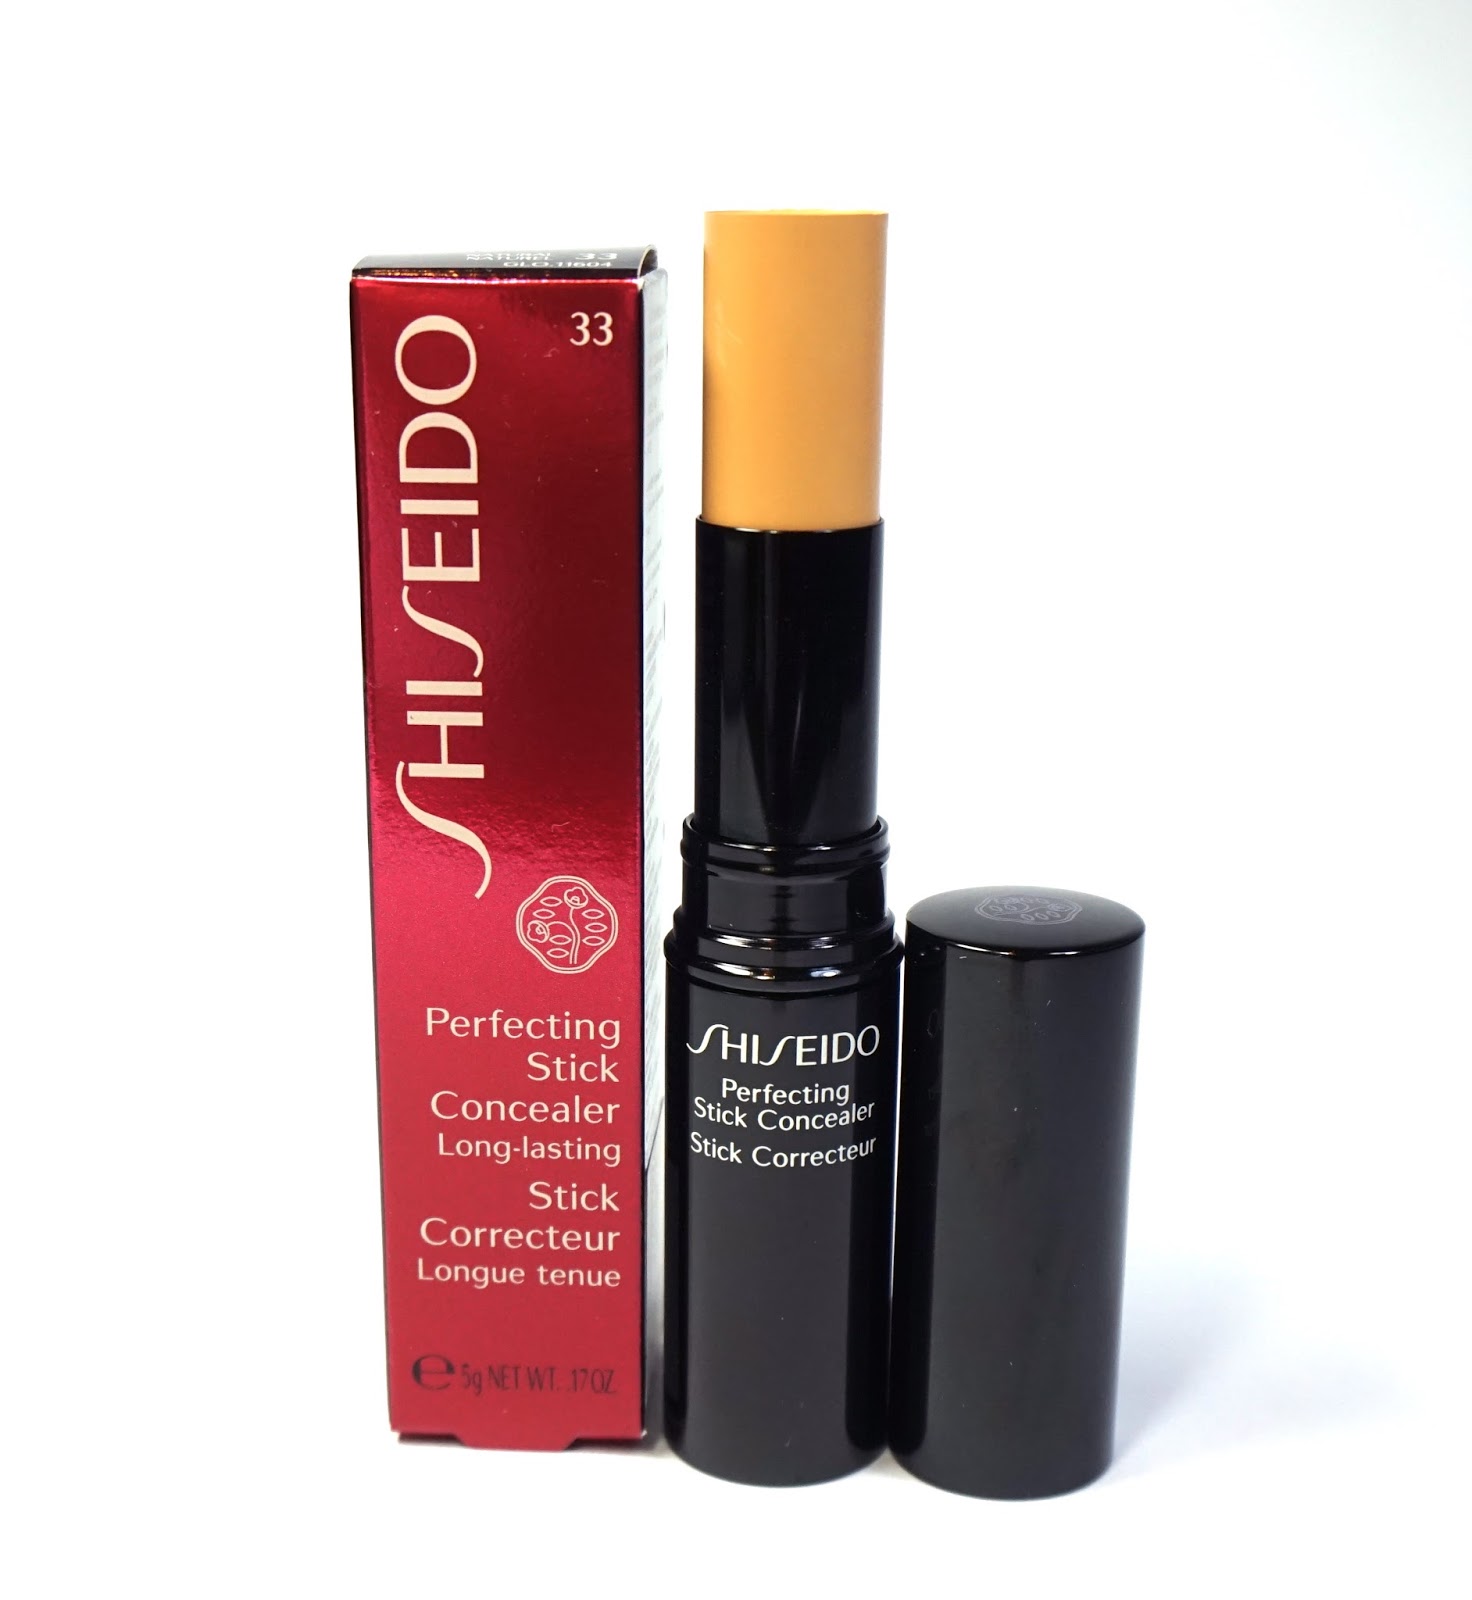 Shiseido Perfecting Stick Concealer in 33 Review Swatches